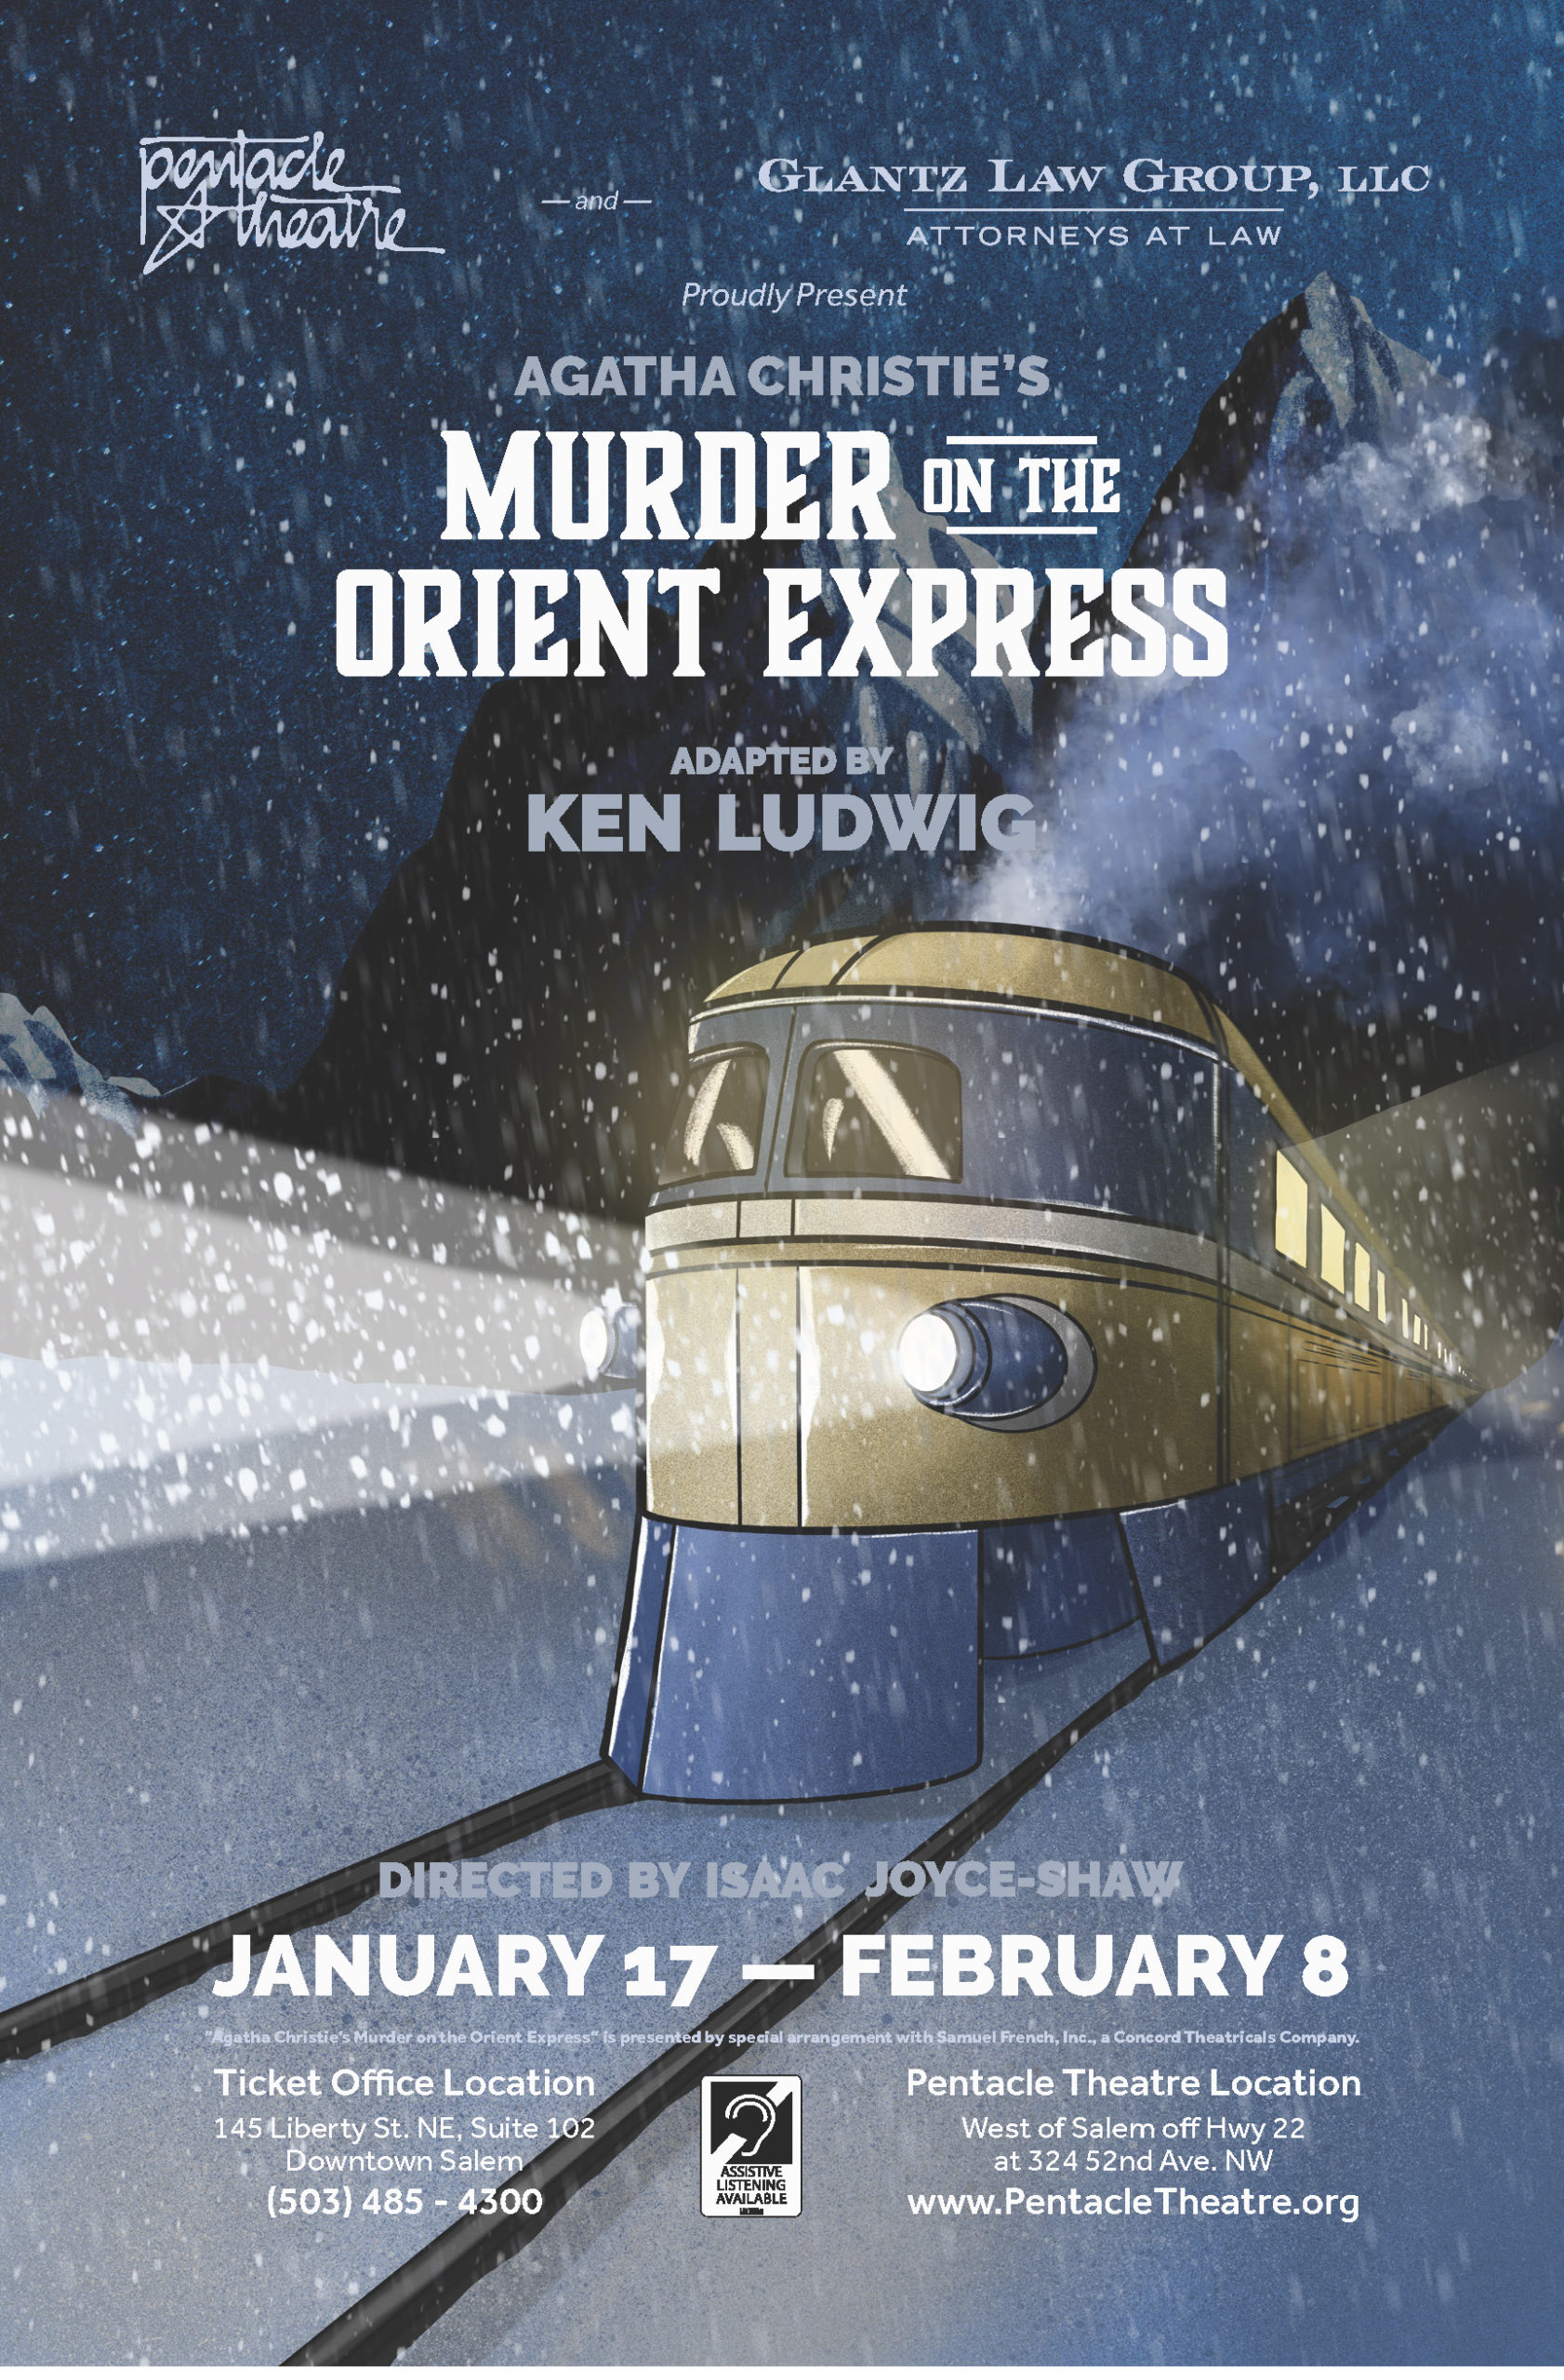 Program for “Murder on the Orient Express”